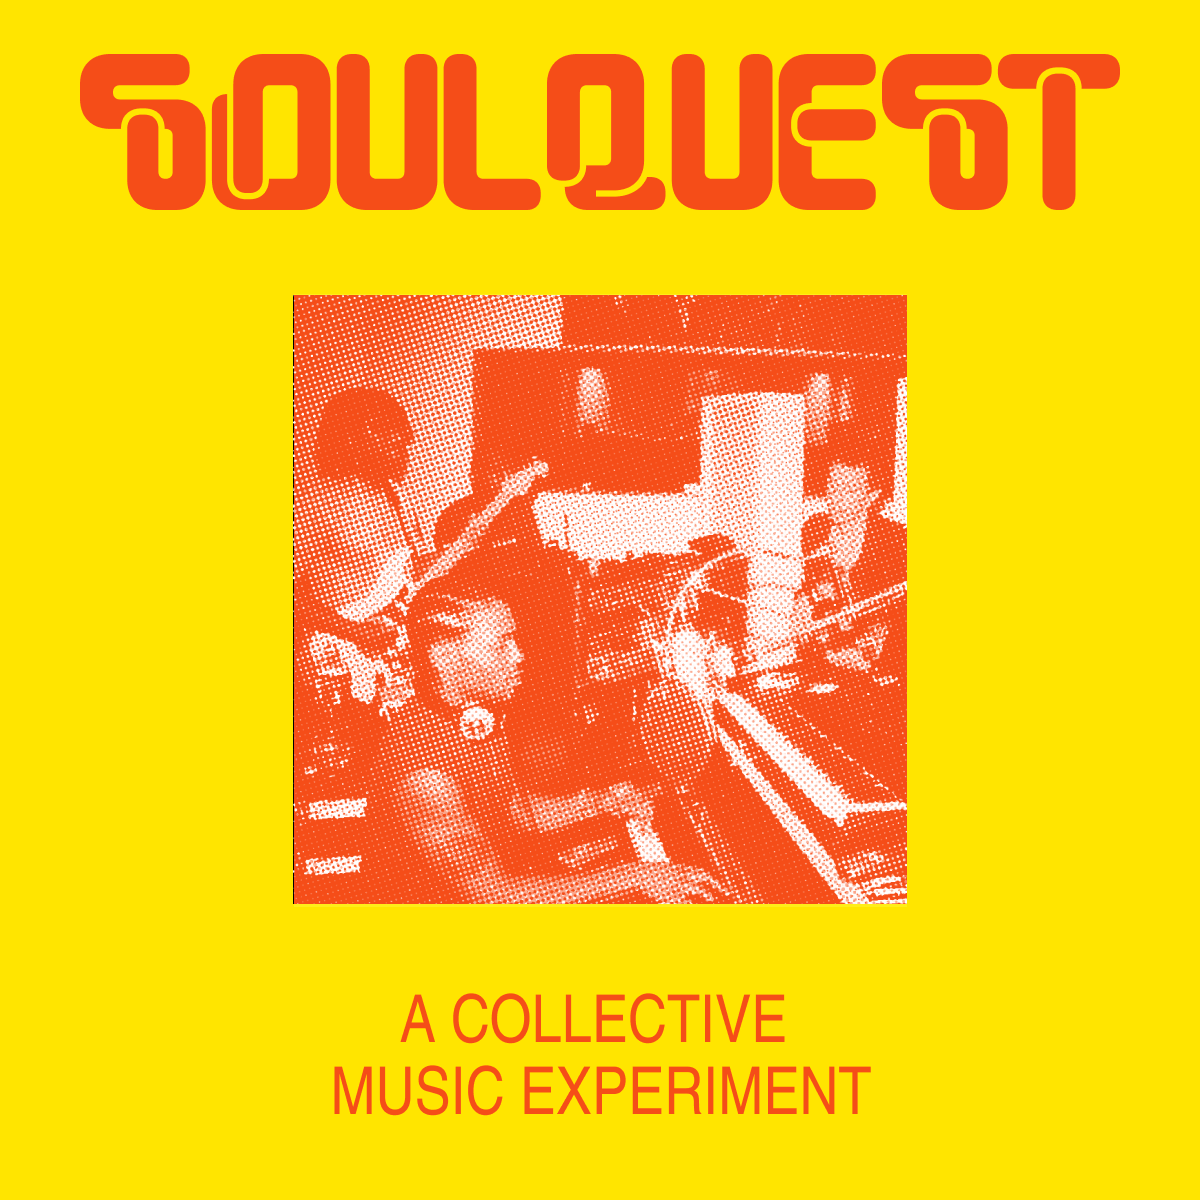 A collective music experiment